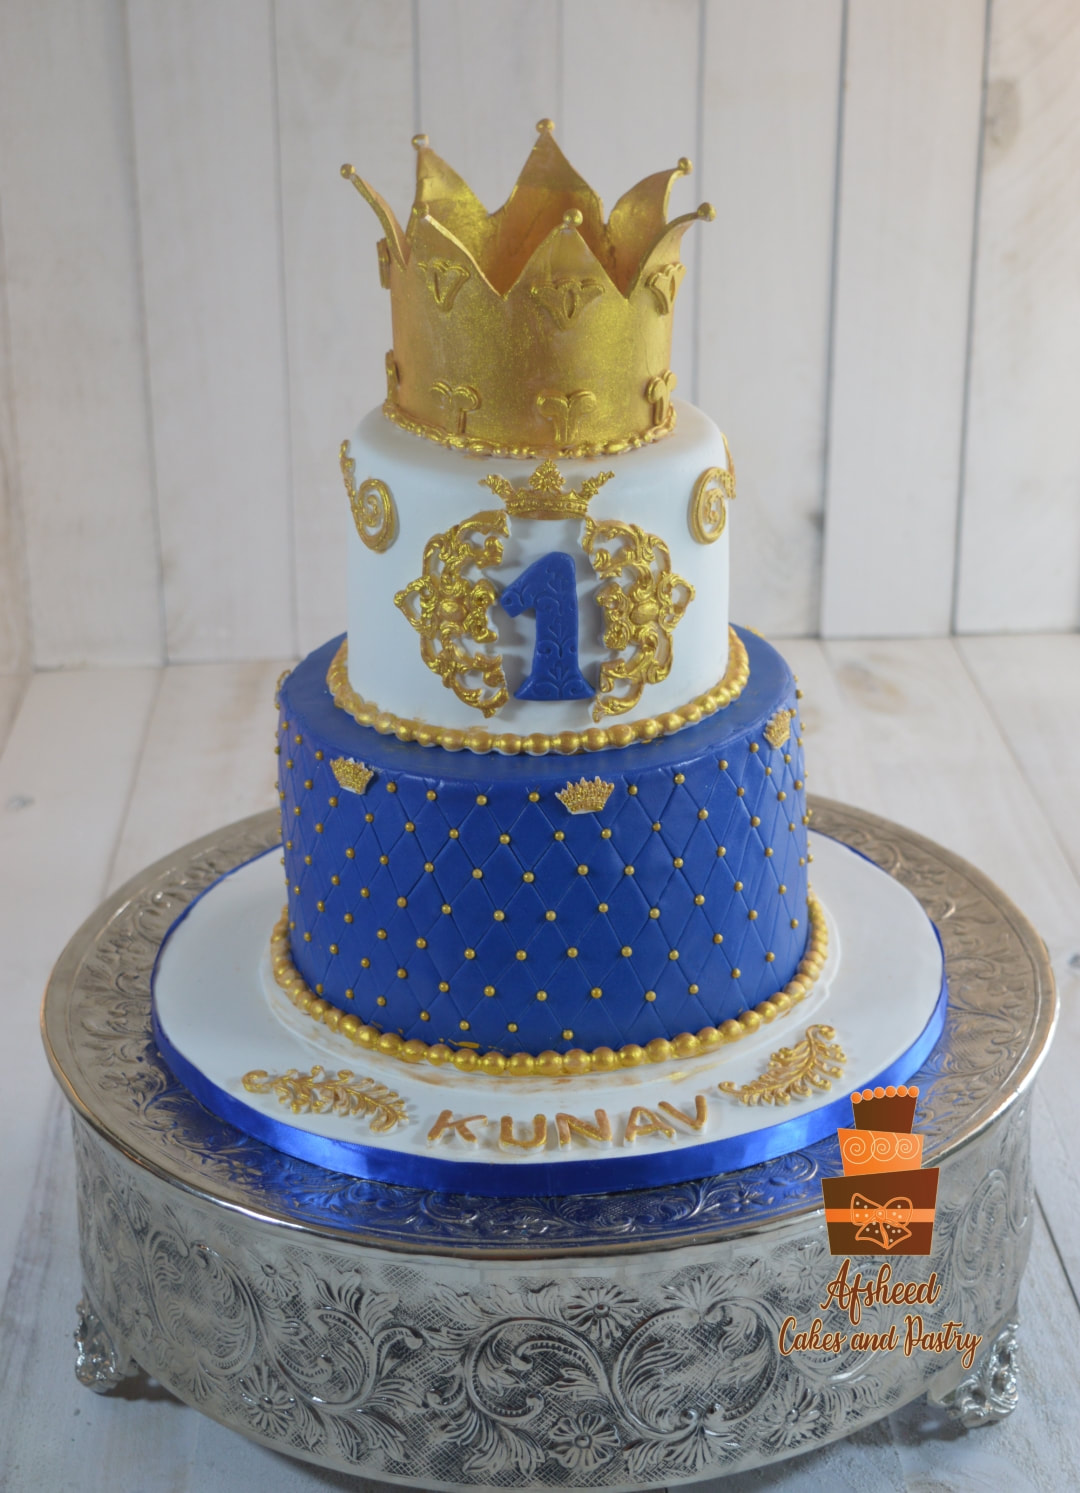 All the Cakes Royals Have Served at Their Weddings - Royal Wedding Cake  Flavors and Pictures